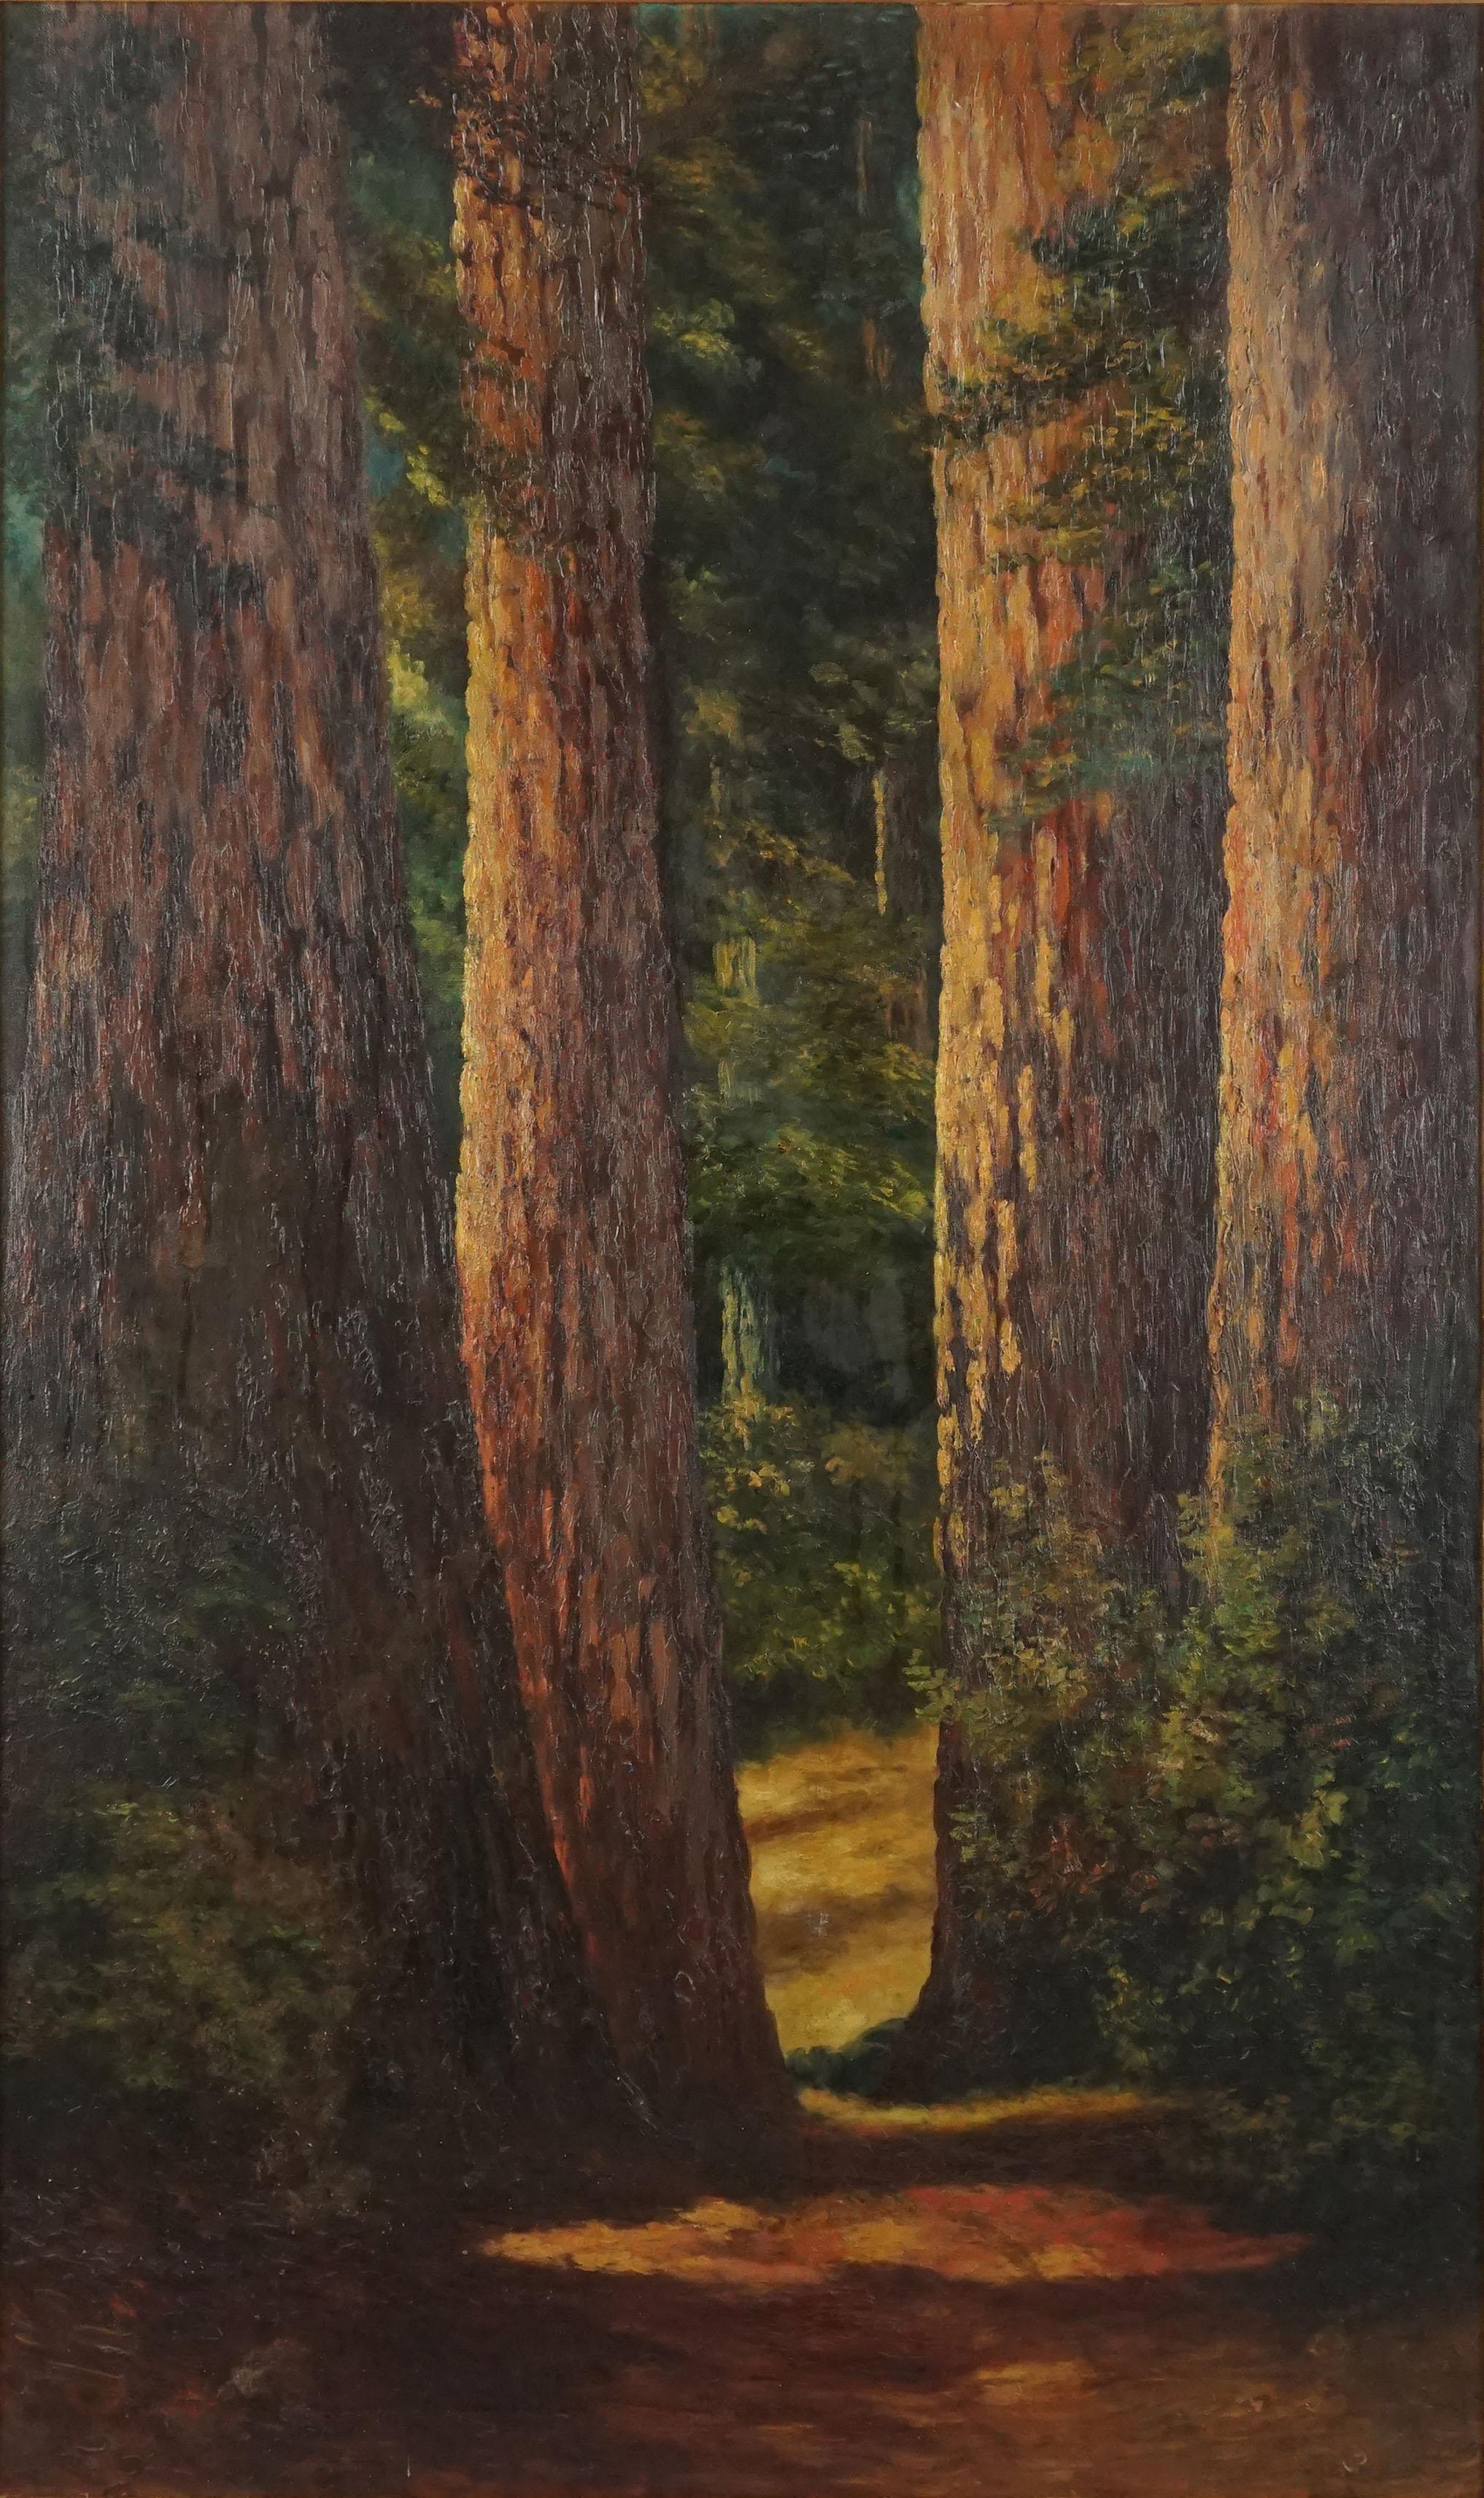 Turn of 20th Century Northern California Landscape -- Redwood Forest Floor - Painting by Frank Lucien Heath